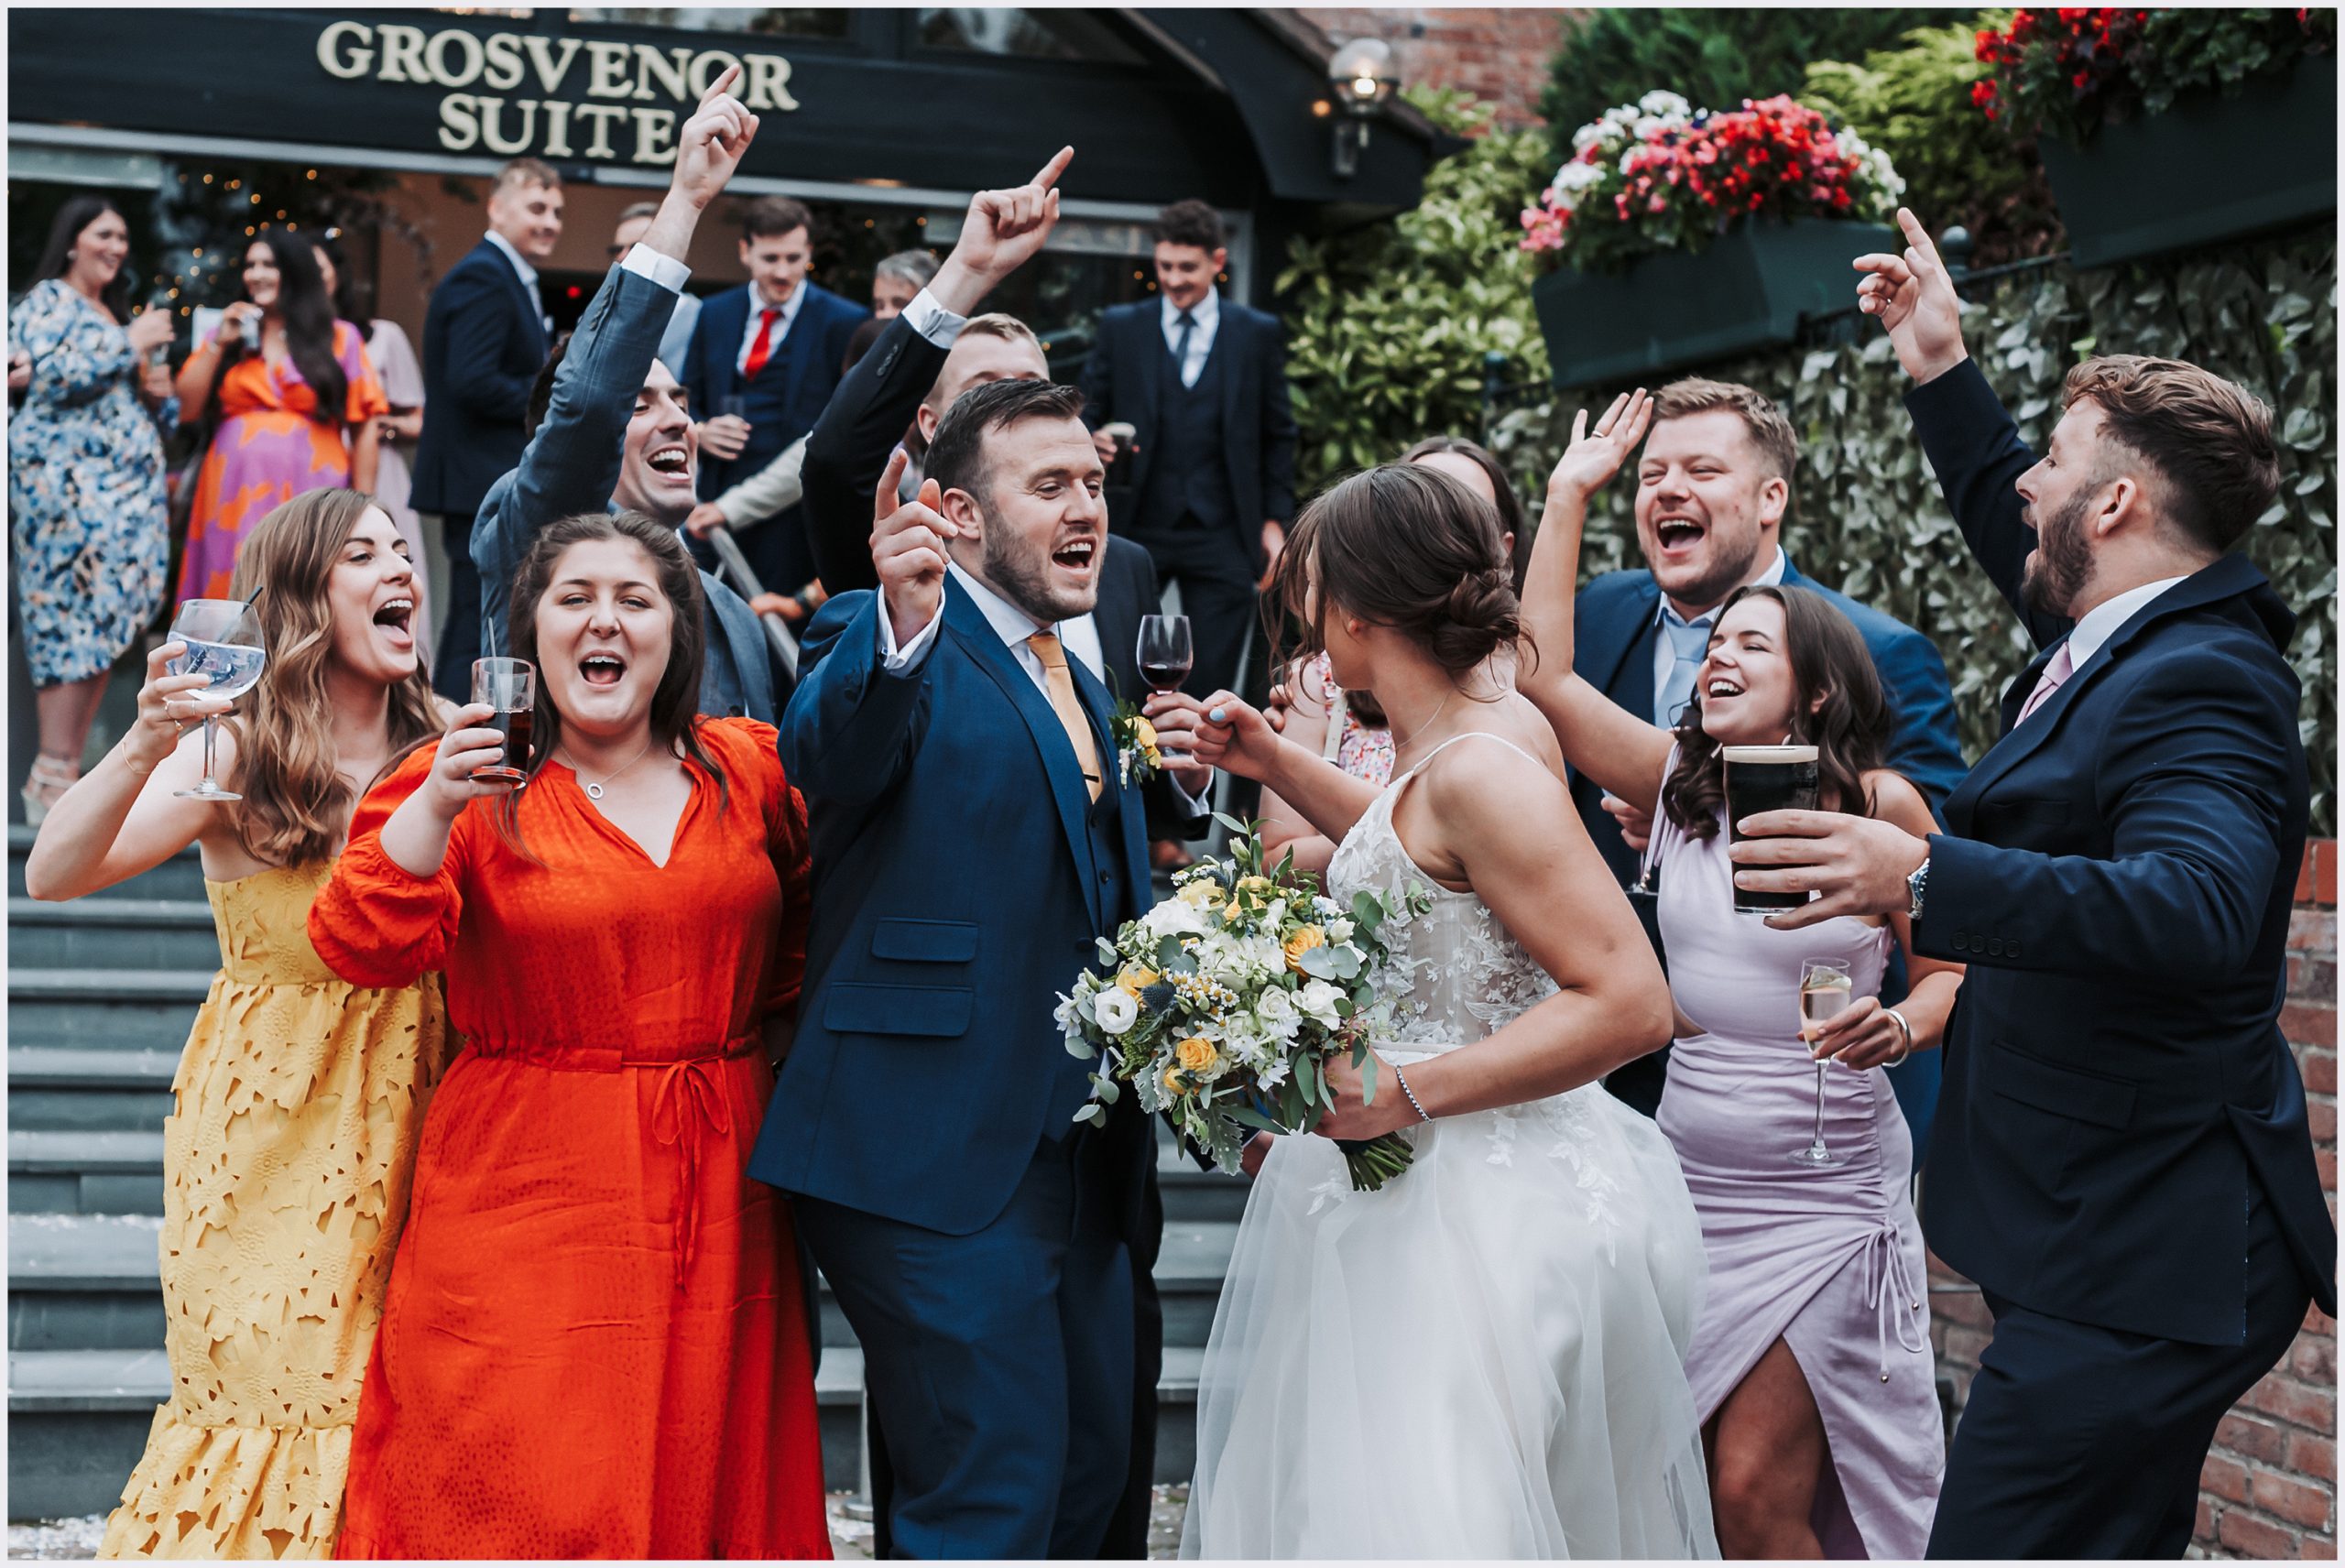 A group of friends laugh and joke with the bride and groom outside the entrance of the Grosvenor Pulford Hotel and Spa. Image captured by Grosvenor Pulford wedding photographer Helena Jayne Photography